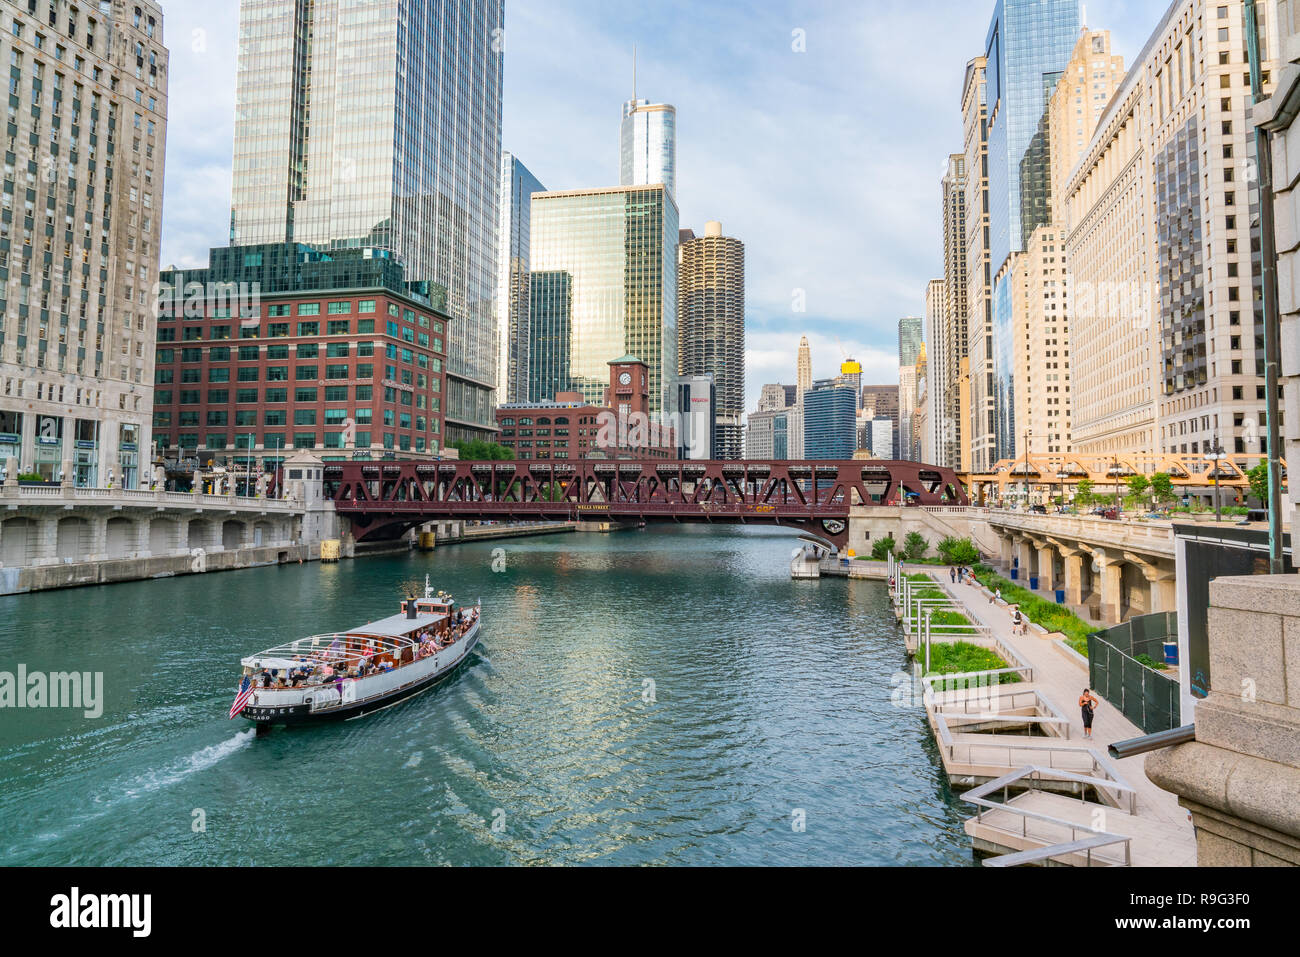 CHICAGO, IL - JULY 12, 2018: Downtown Chicago along the Chicago River near Wells Street. Stock Photo